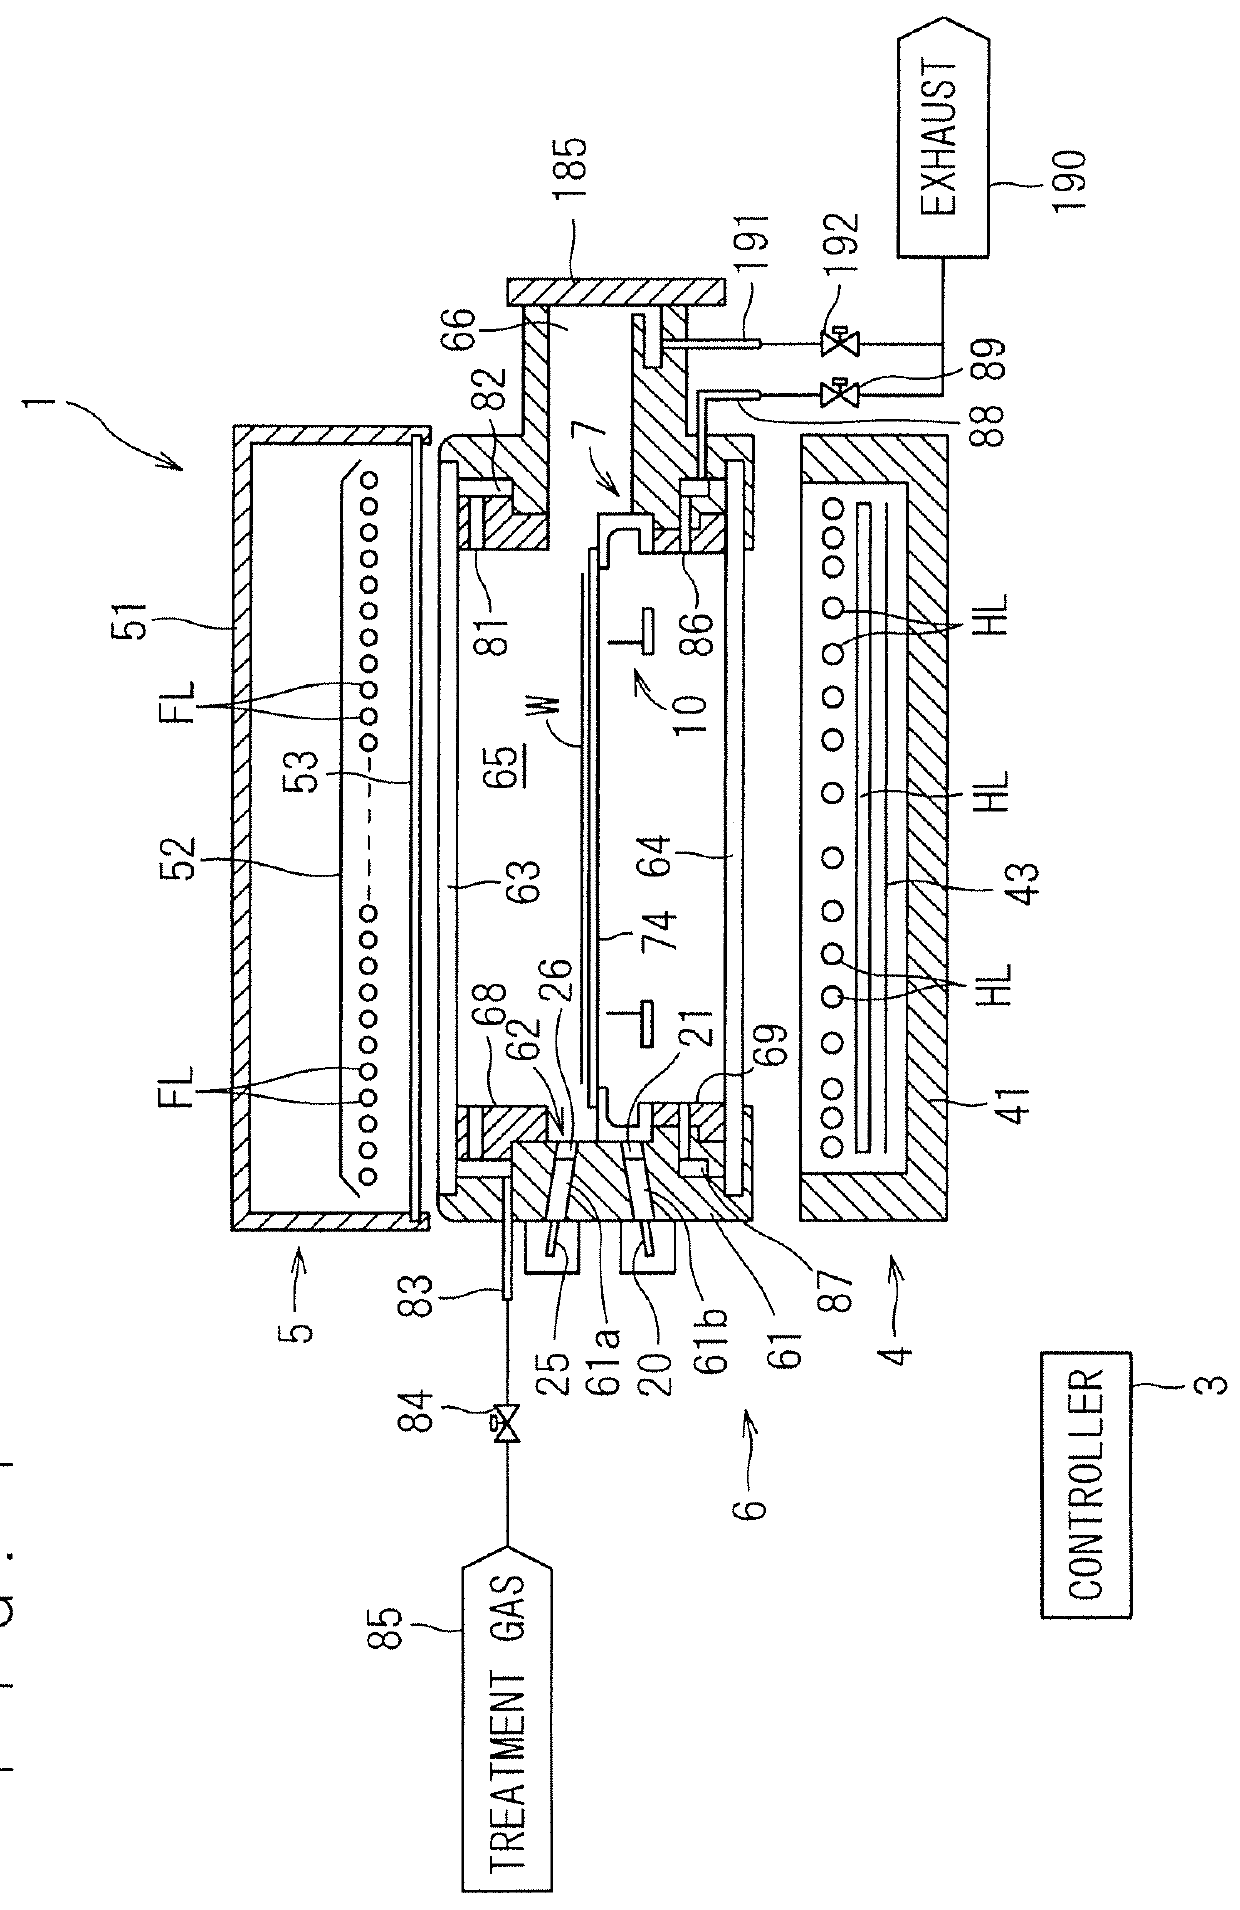 Method of adjusting measurement position of radiation thermometer and heat treatment apparatus